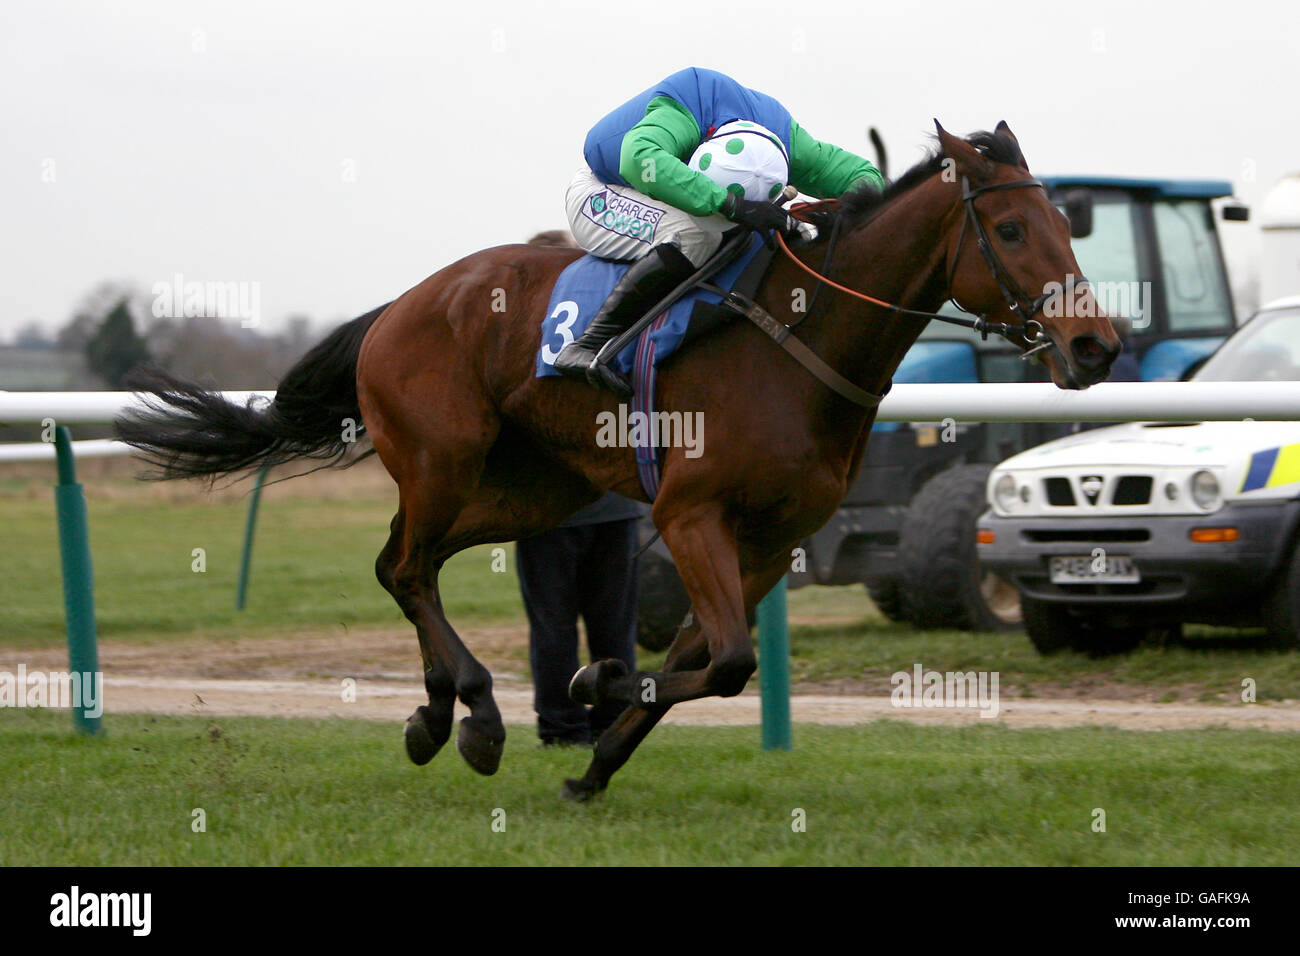 Horse Racing - Warwick Racecourse. Marodima ridden by Sam Thomas during The Highflyer Bloodstock Four Years Old Novices Steeple Chase (class 3) Stock Photo